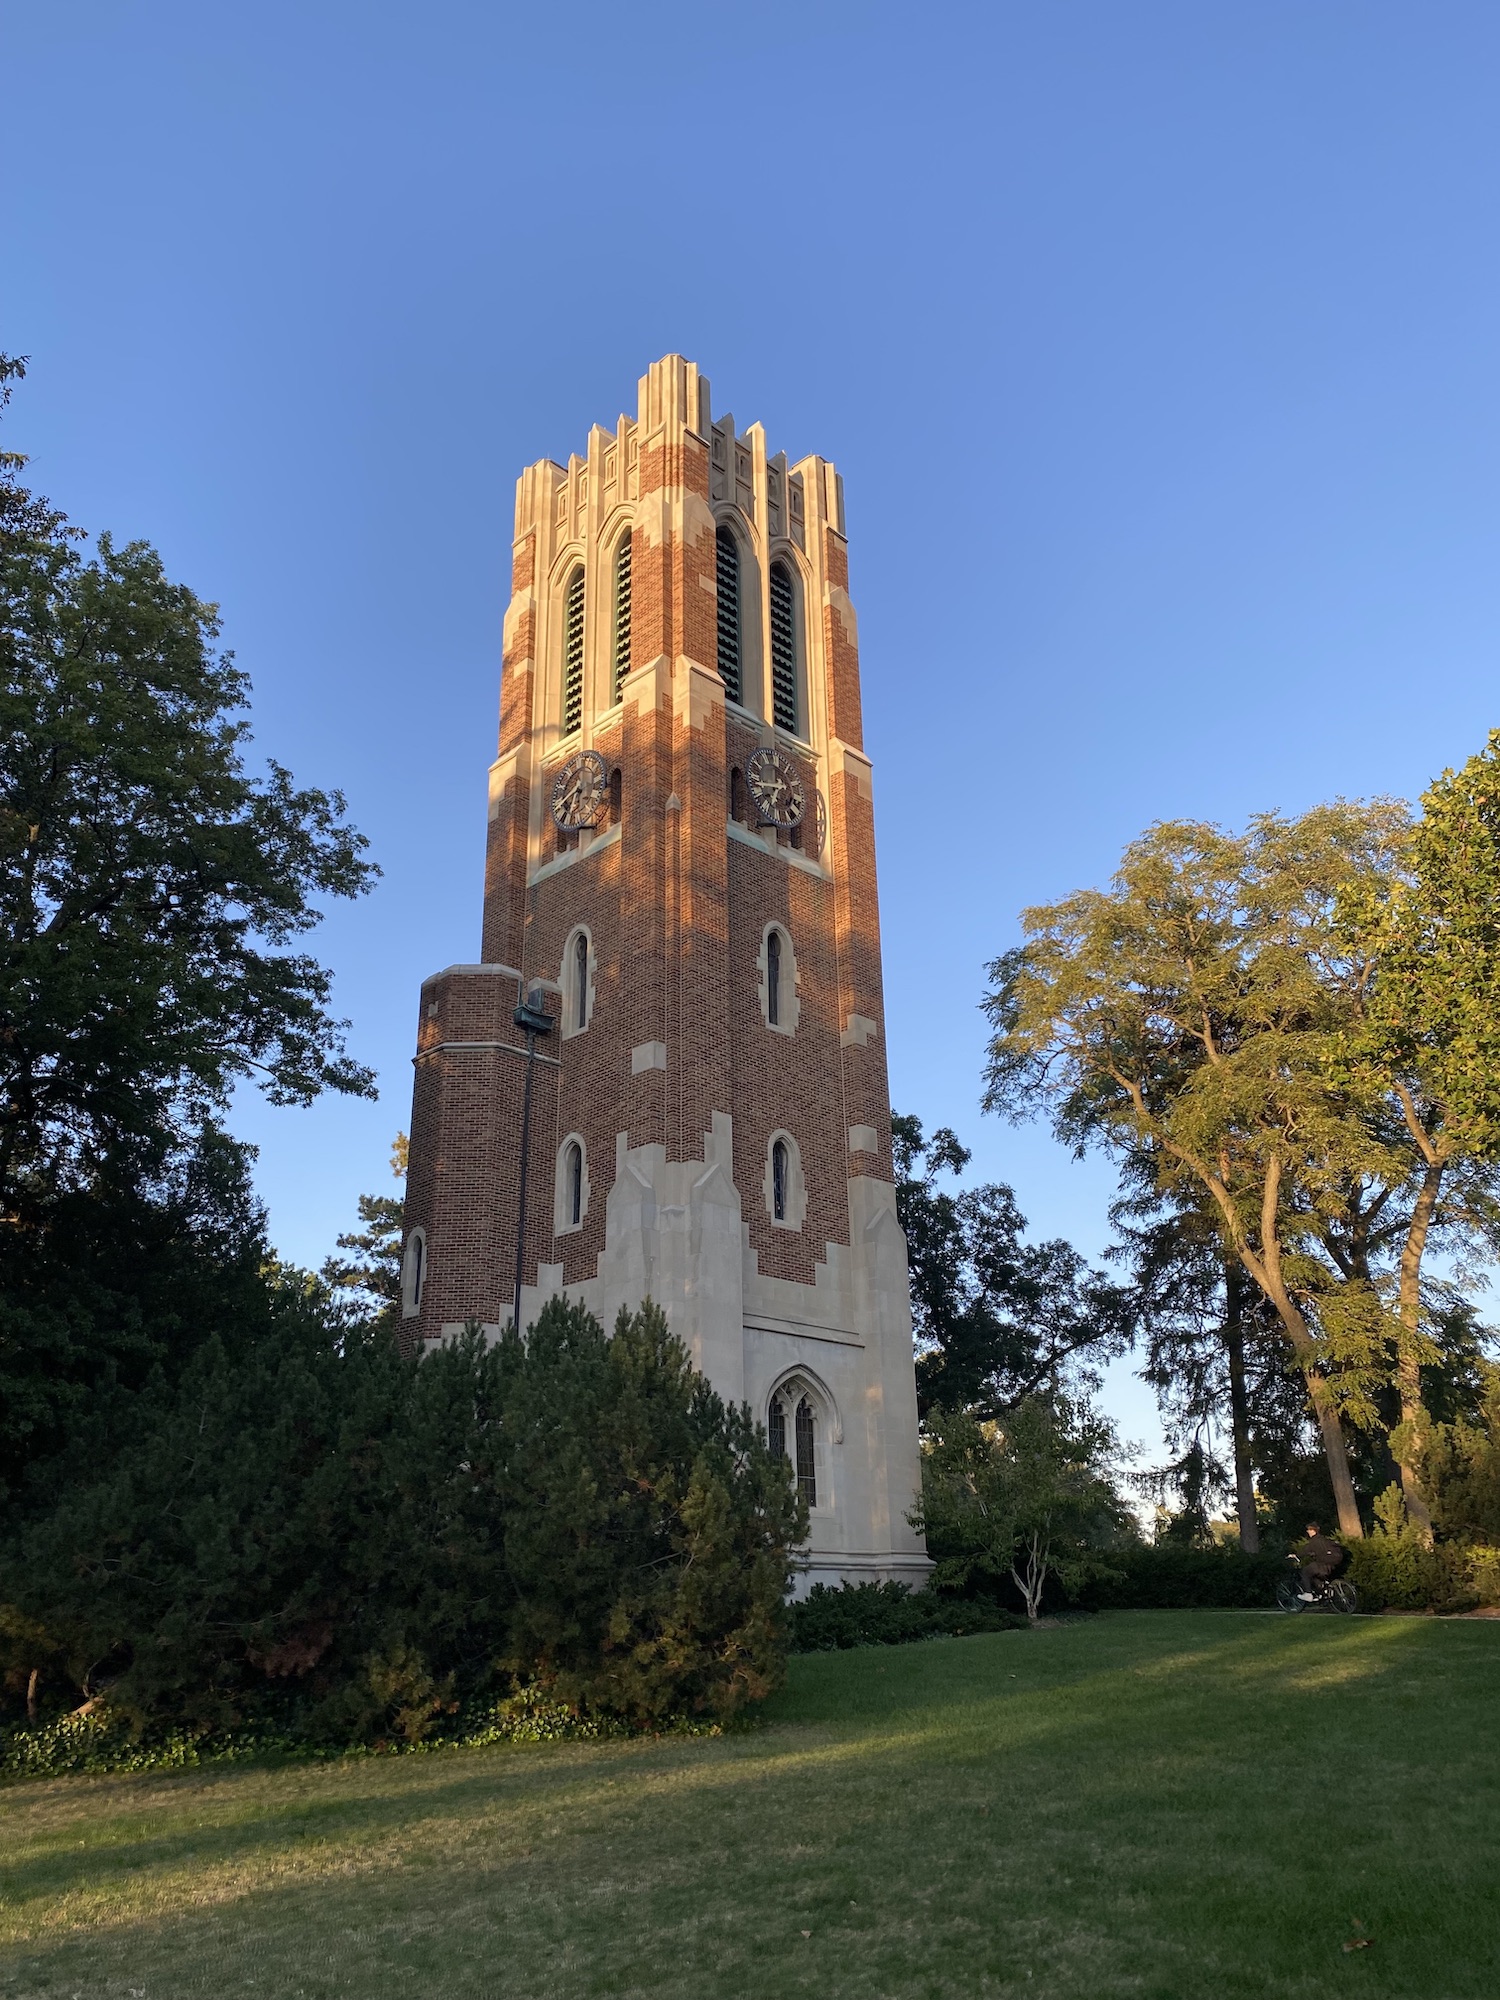 Beaumont Tower on a sunny day at dusk